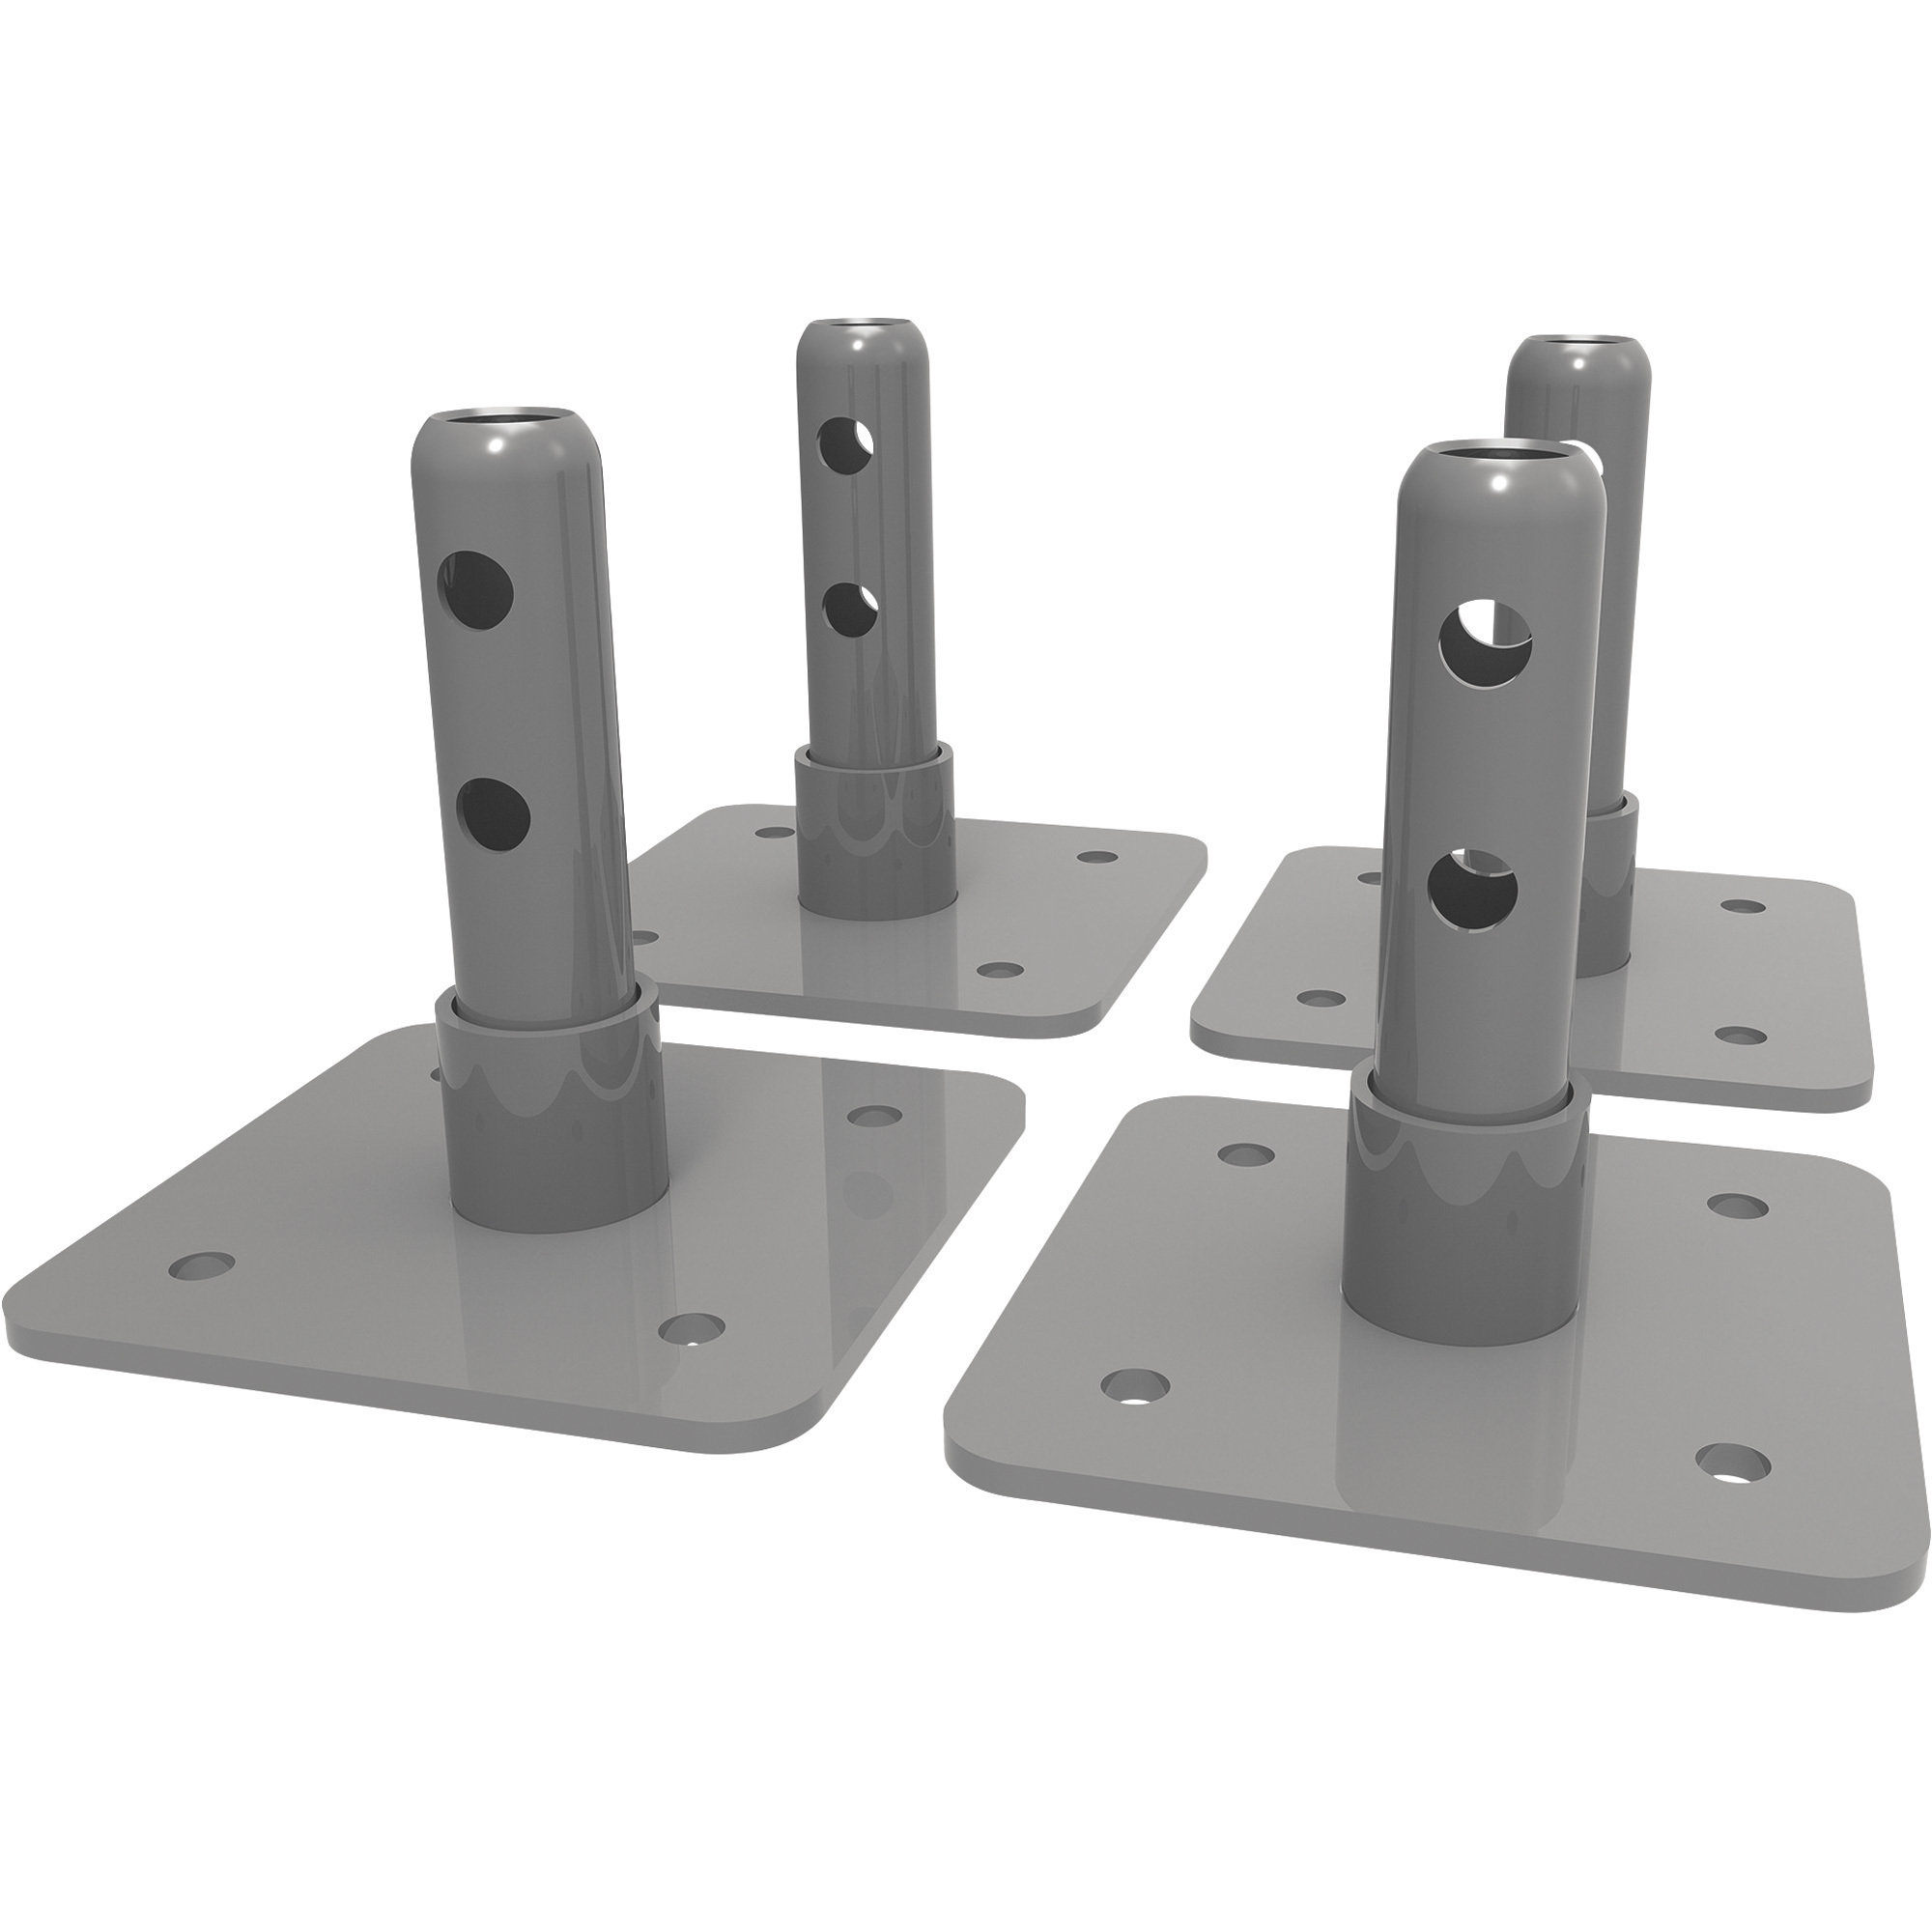 Metaltech Base Plates for Baker Interior Fixed Scaffolds, Set of 4, 4 3/4Inch W x 4 3/4Inch D x 4 3/4Inch H, Model I-IBBF4